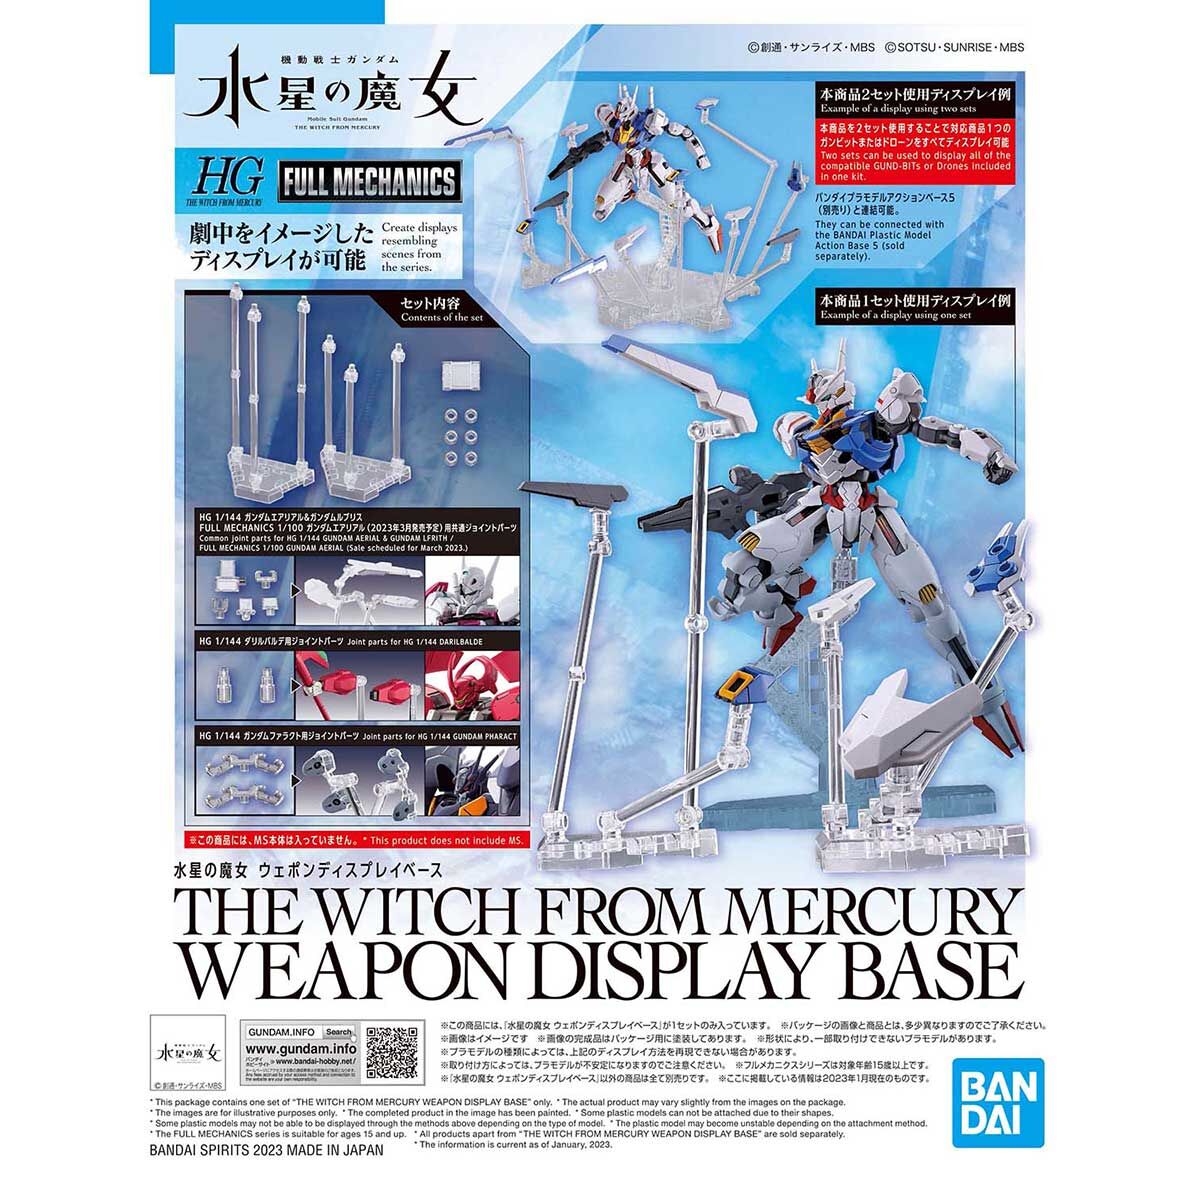 The Witch from Mercury Weapon Display Set